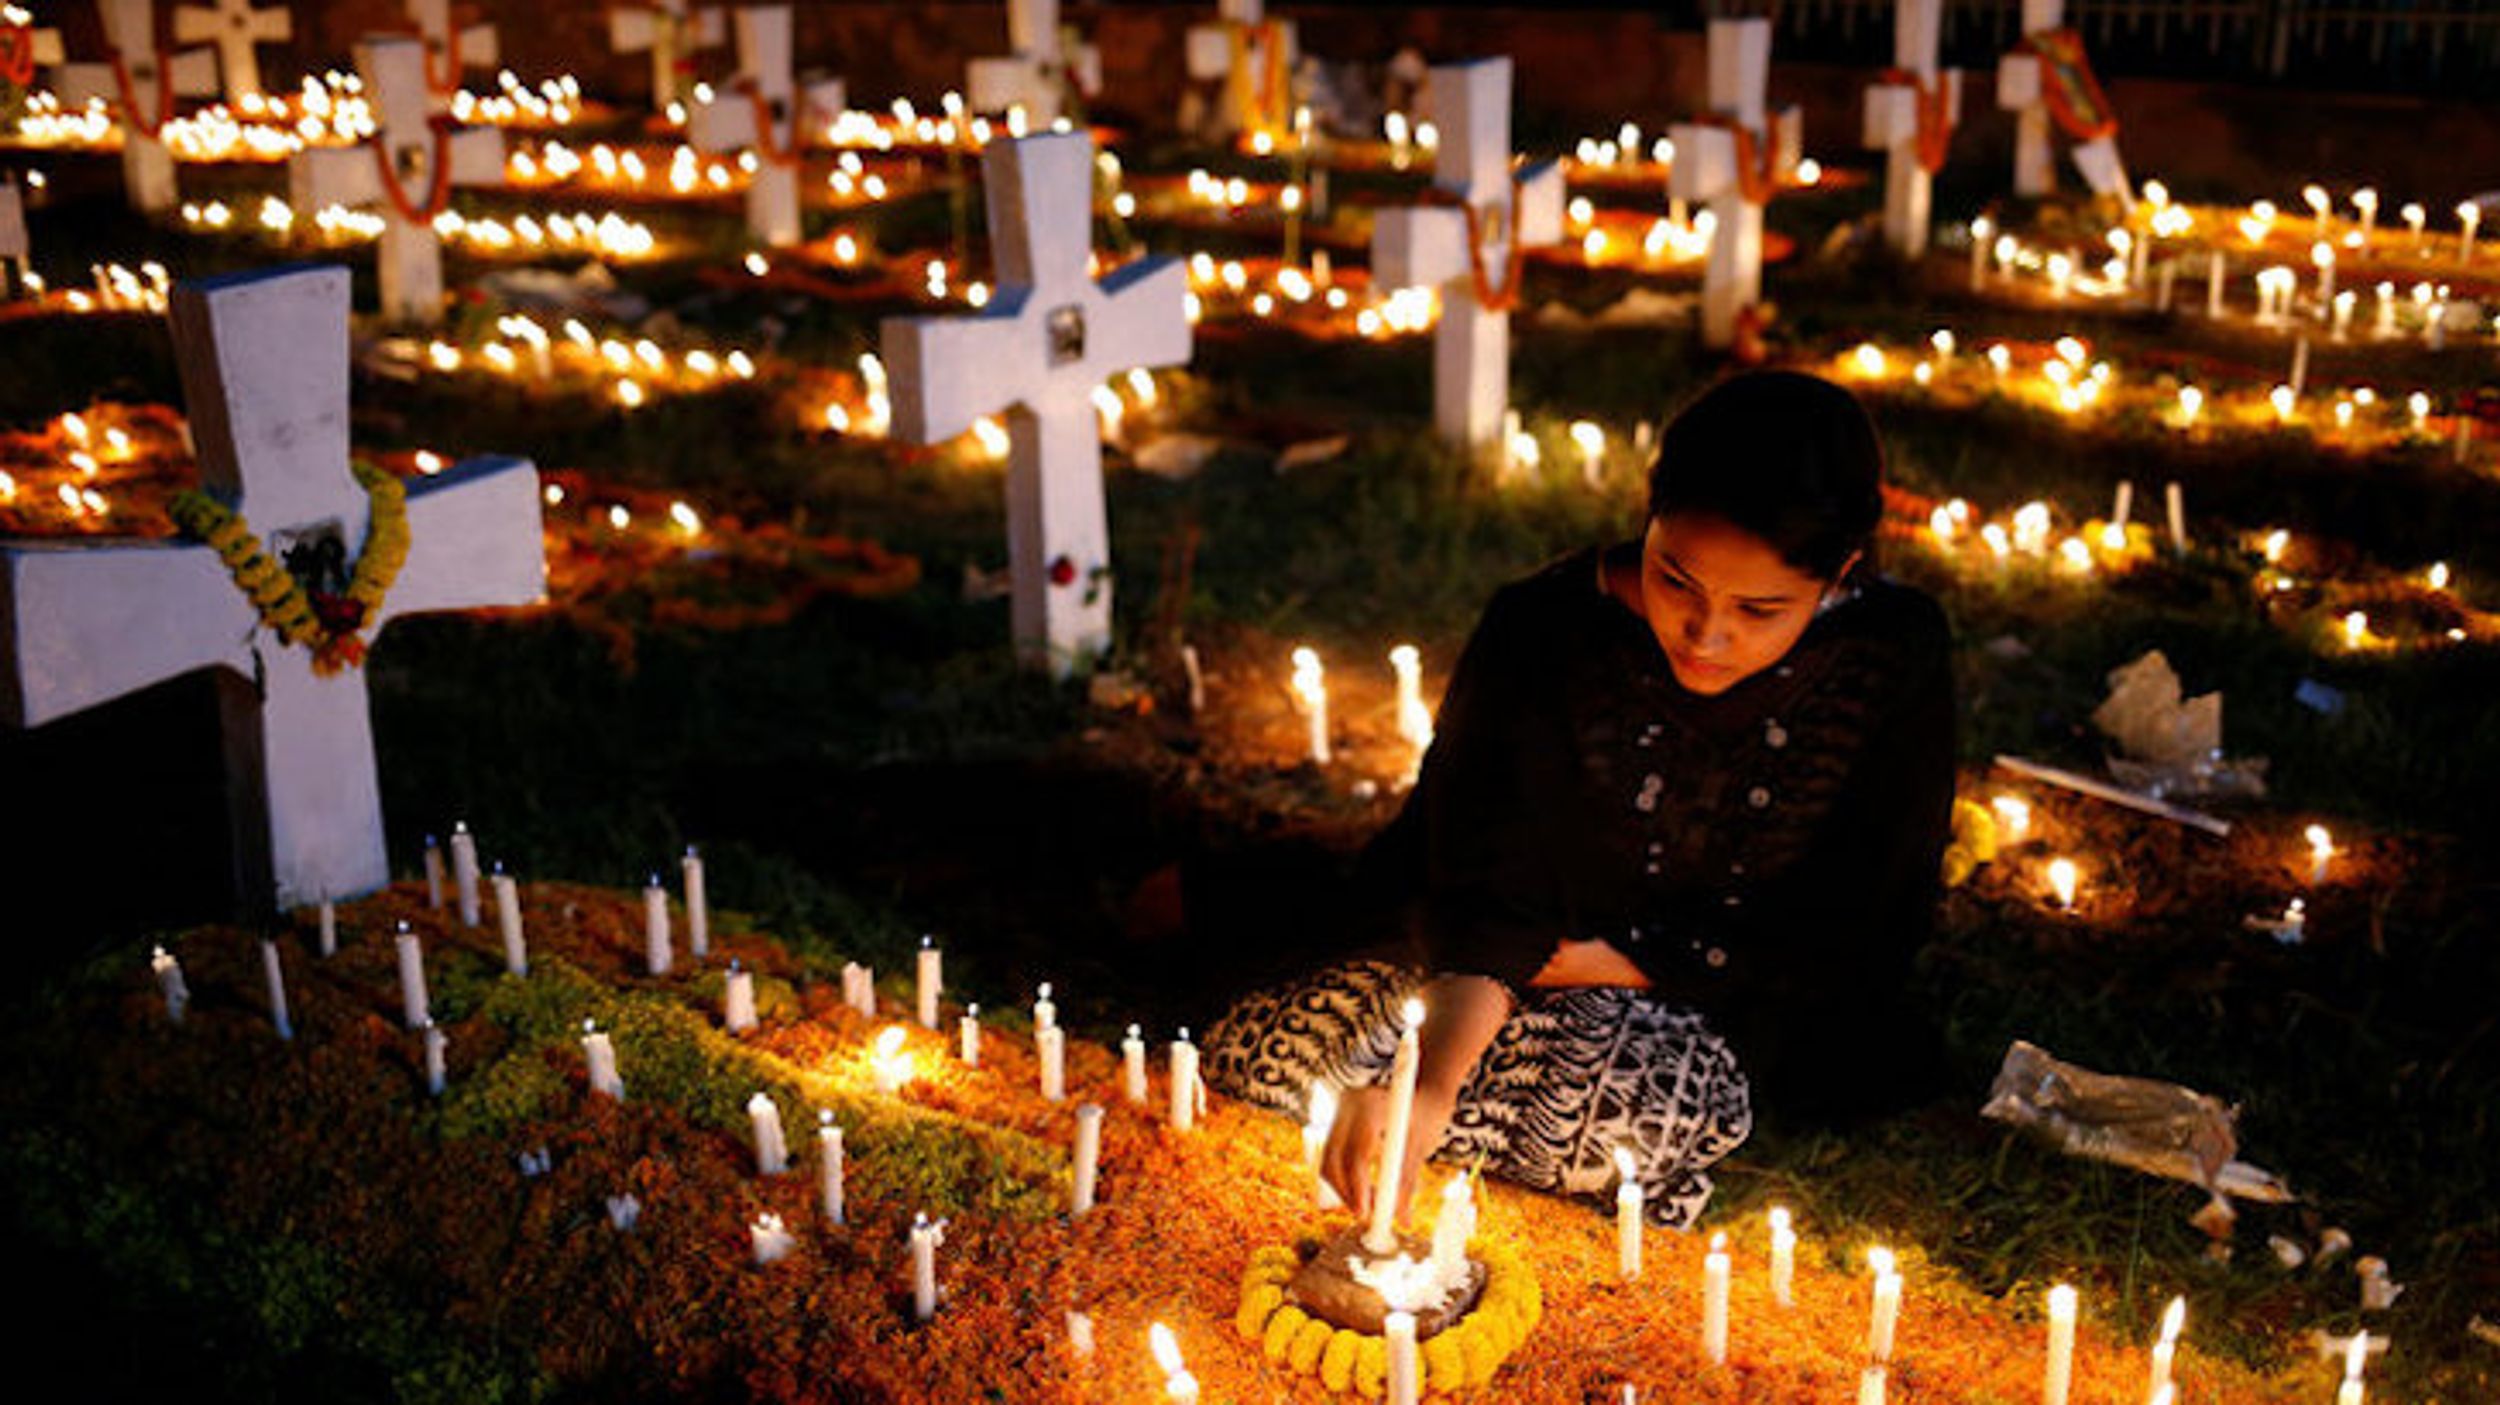 All Souls' Day Traditions 2017: How Do People Celebrate?